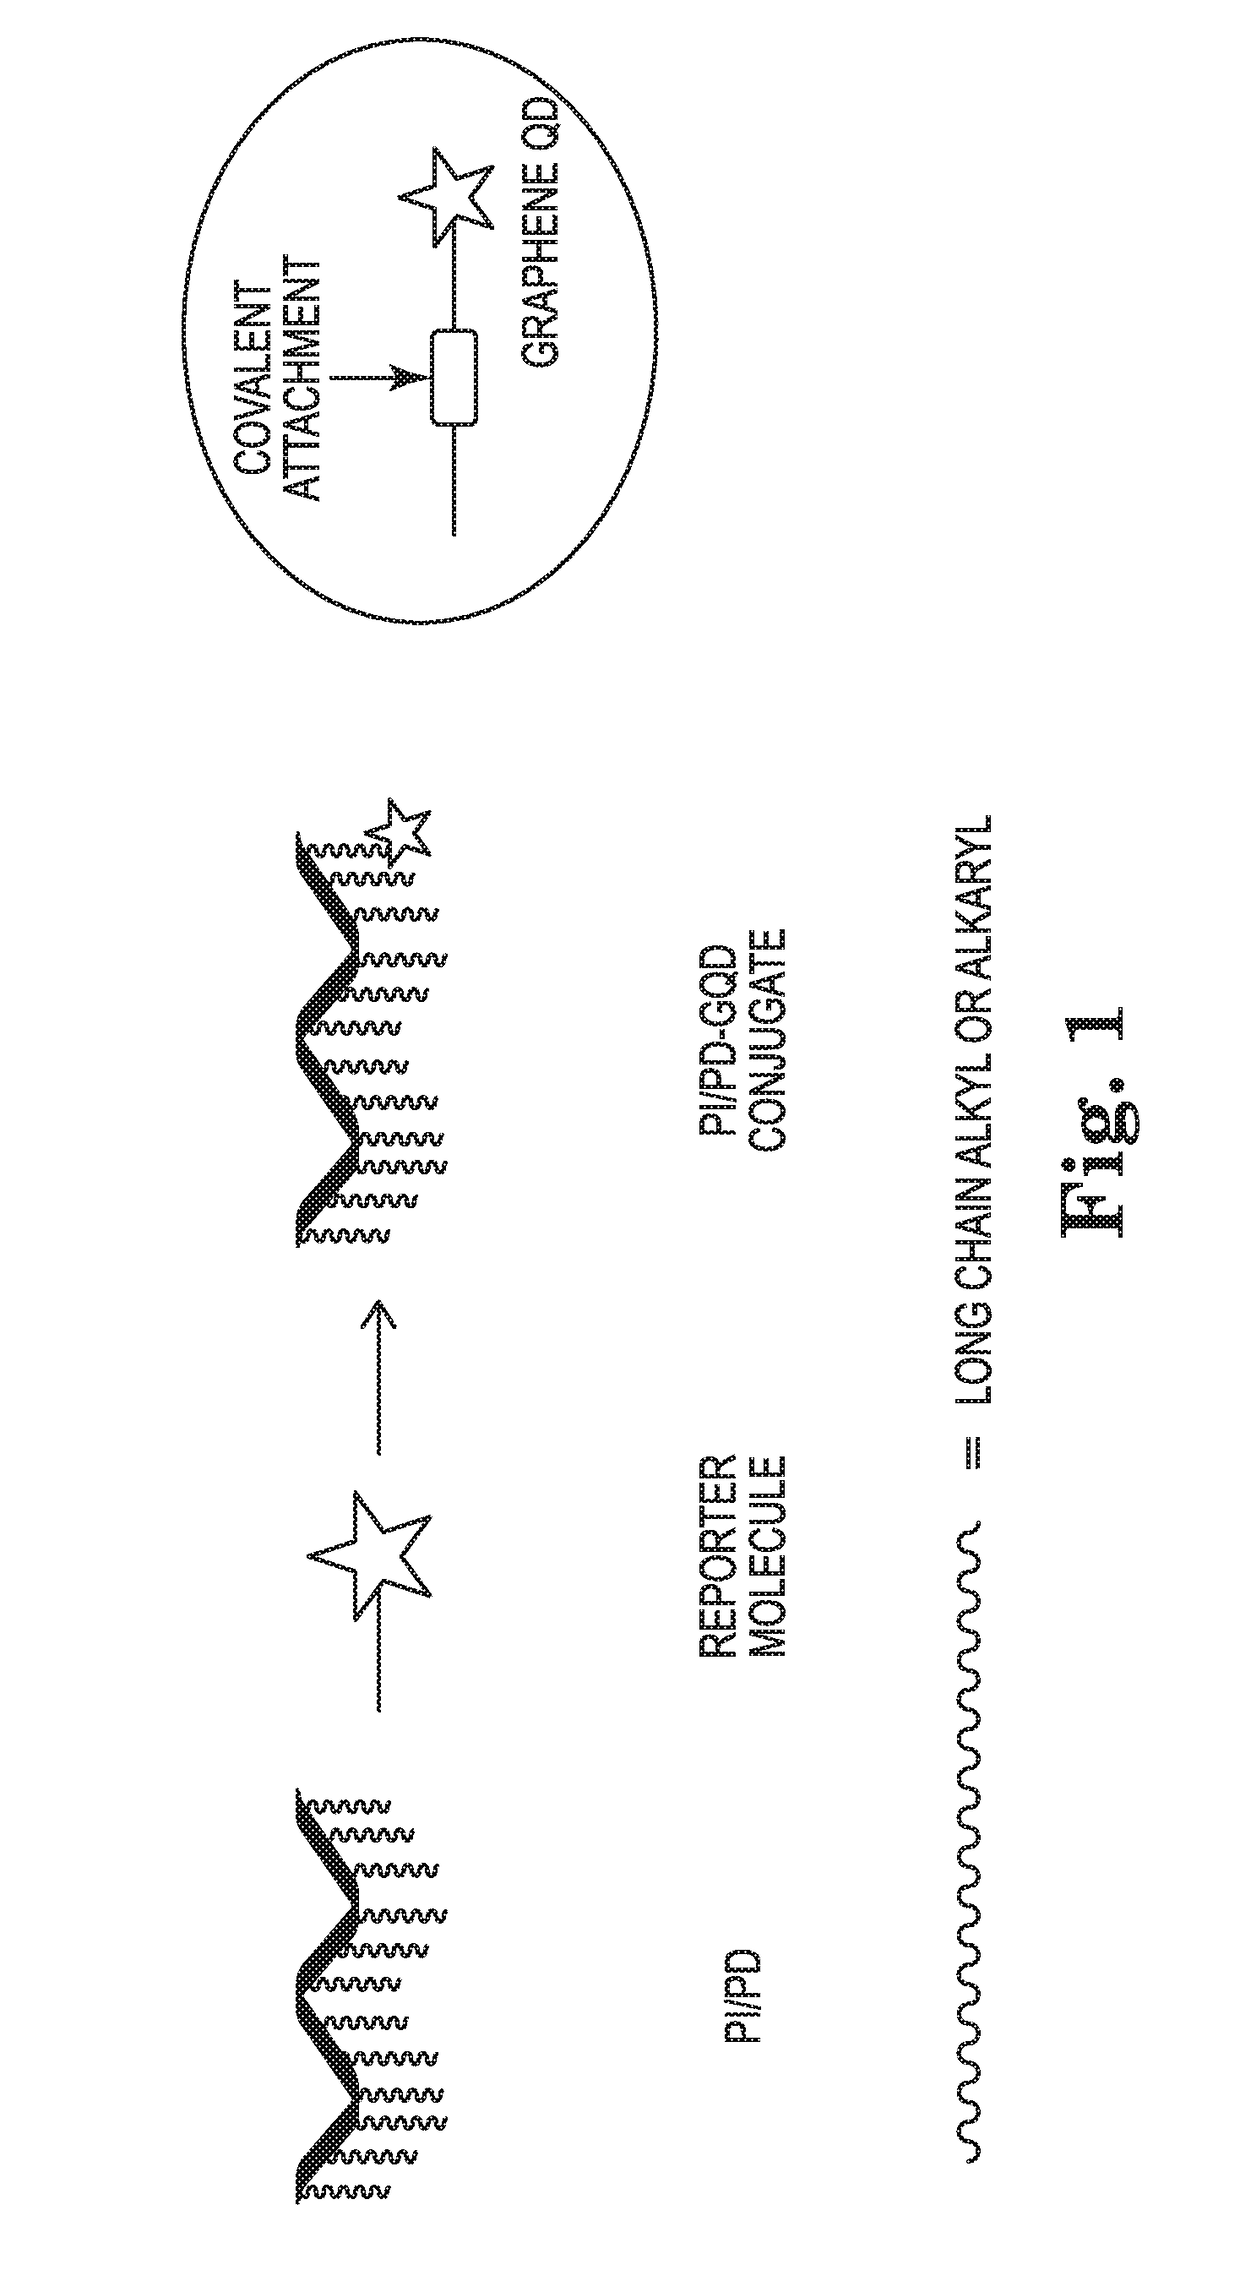 Paraffin suppressant compositions, and methods of making and using